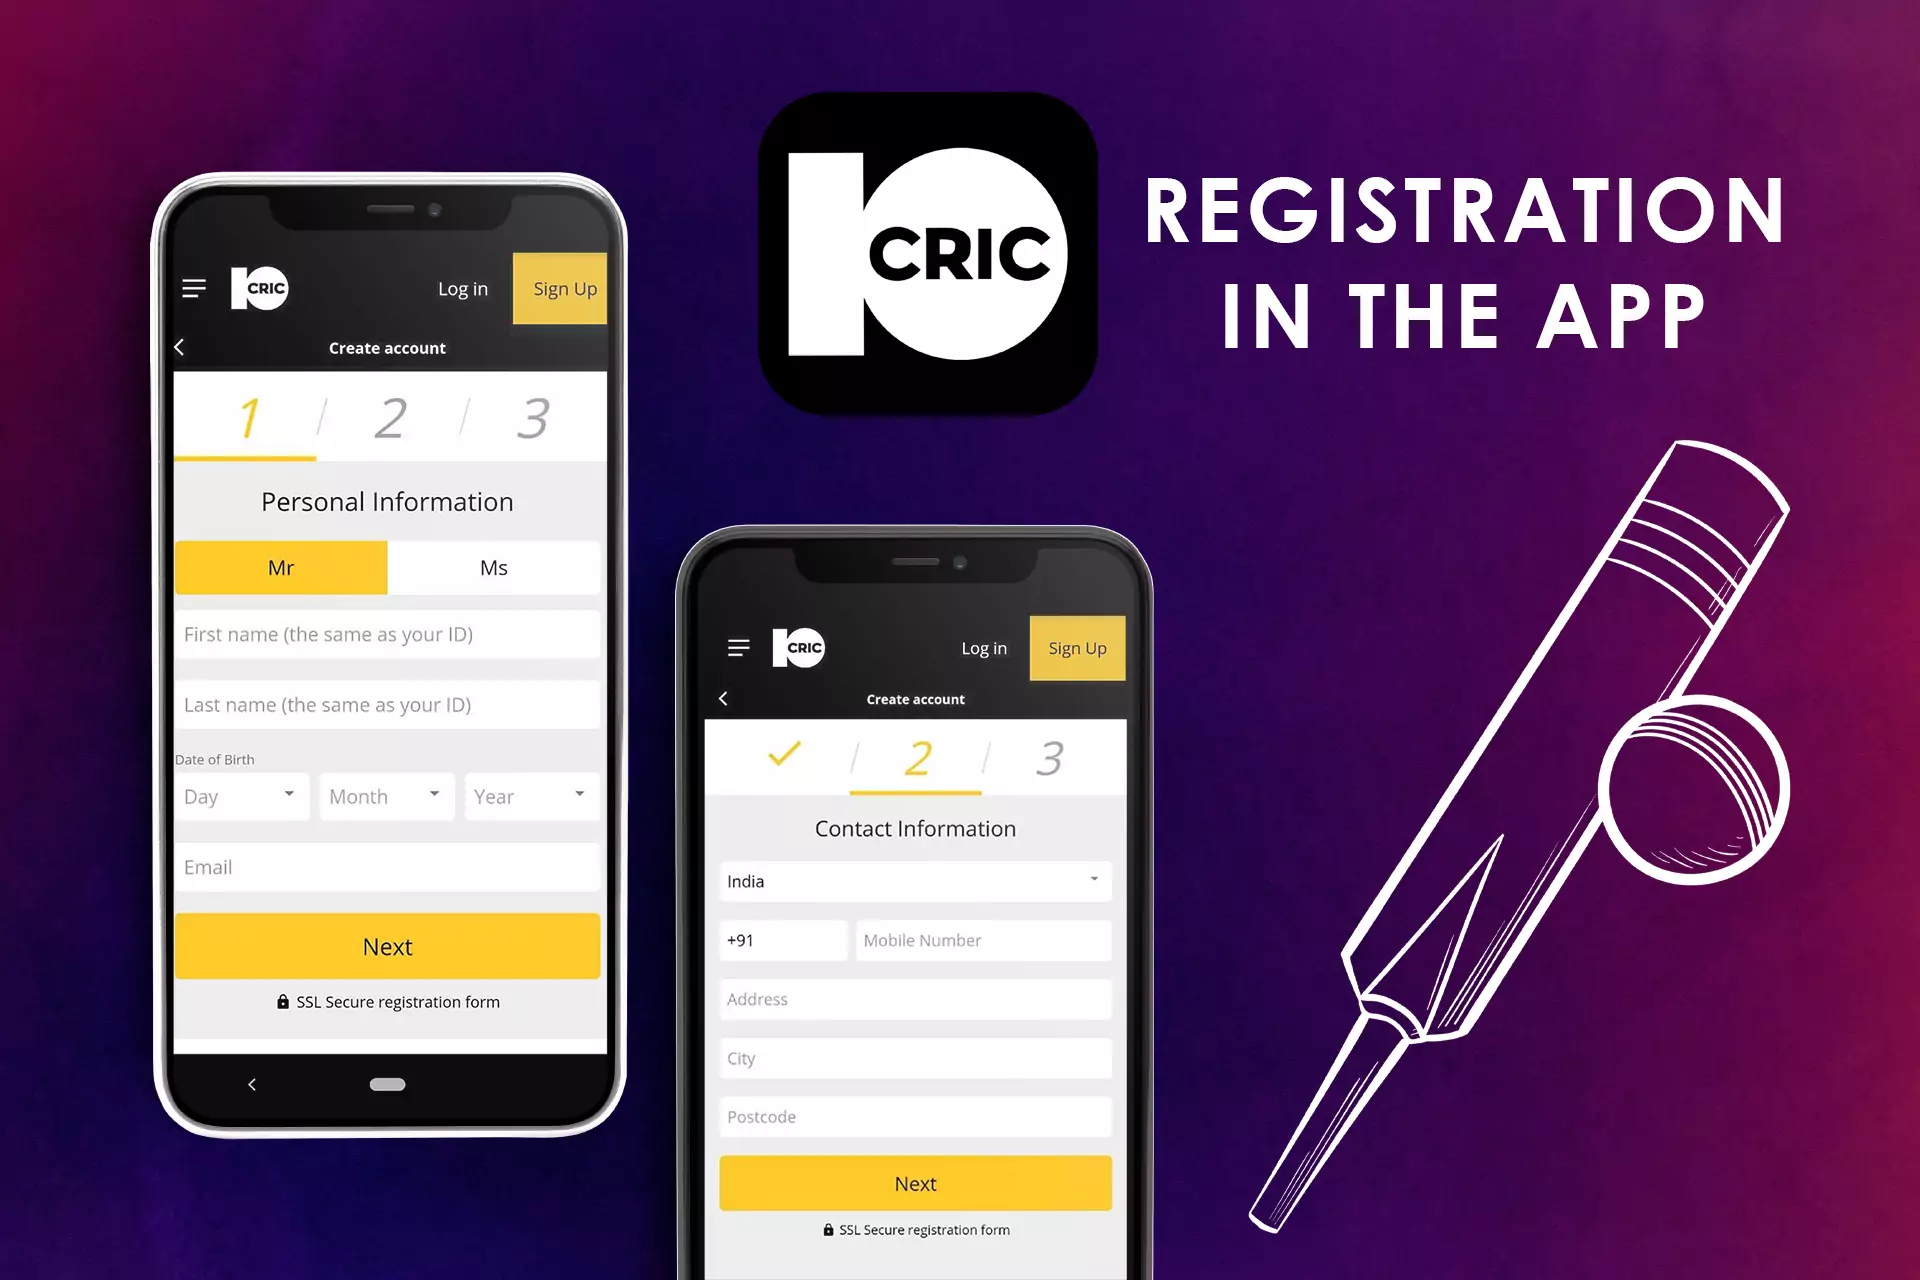 Run the app of 10Cric and fill in the fields at all steps.